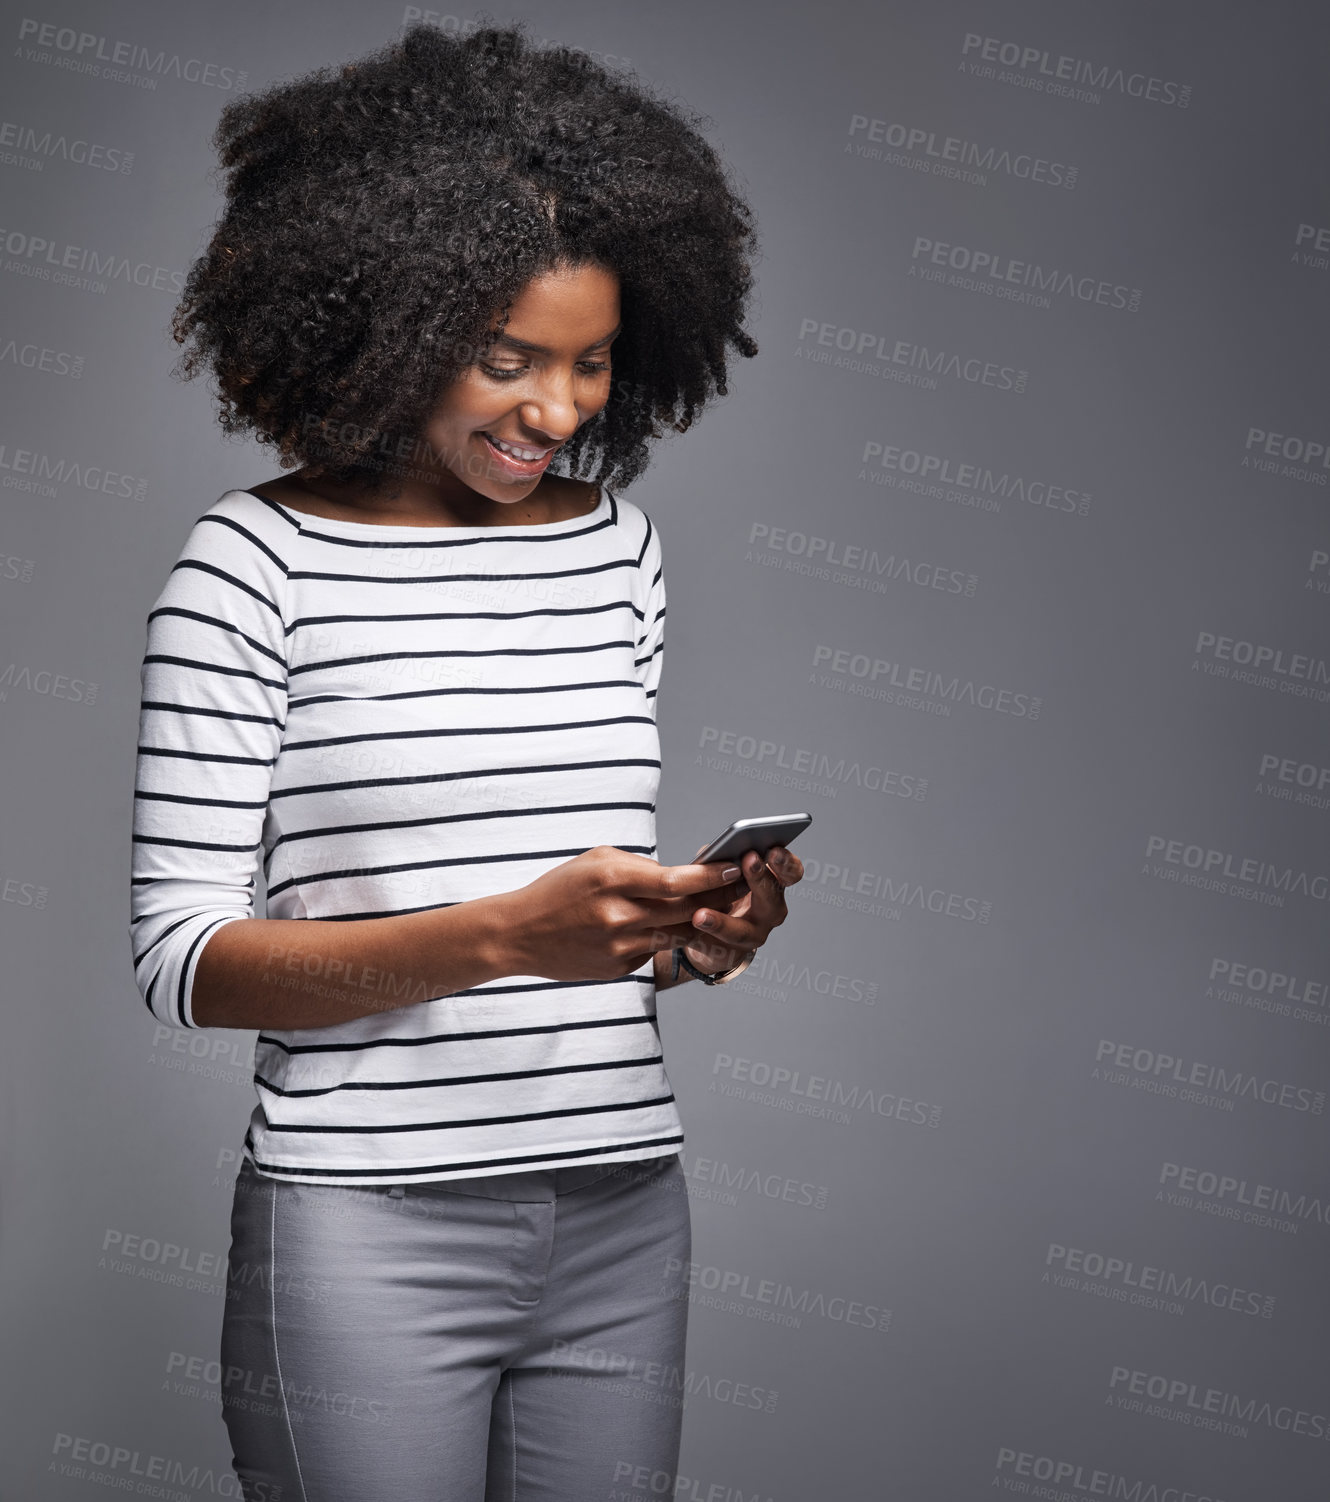 Buy stock photo Studio shot of a young woman using a mobile phone against a gray background